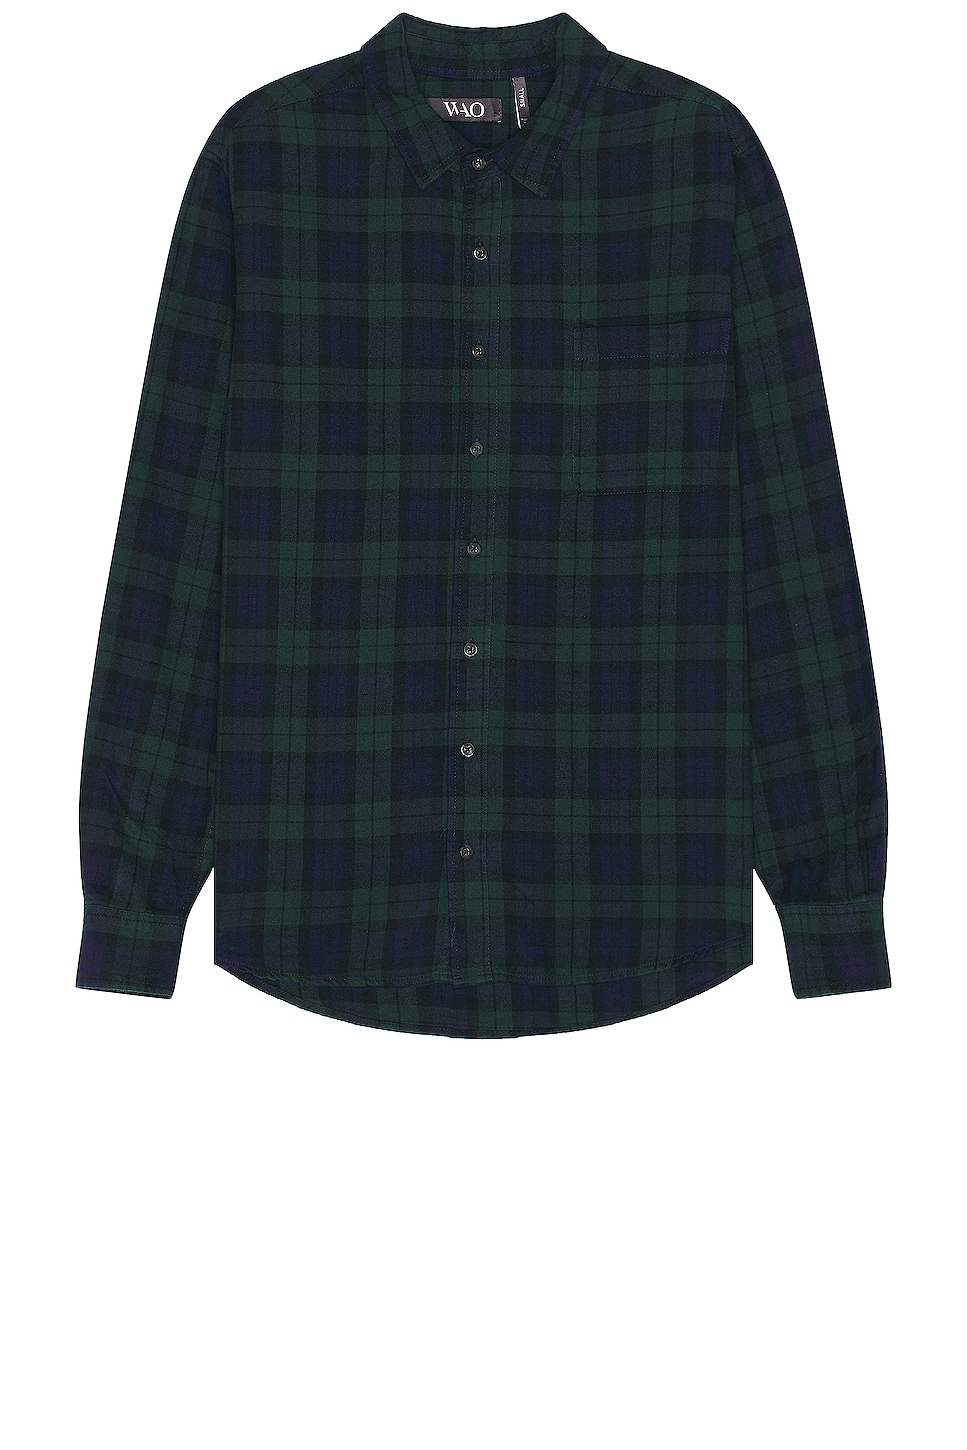 Image 1 of WAO The Flannel Shirt in navy & green